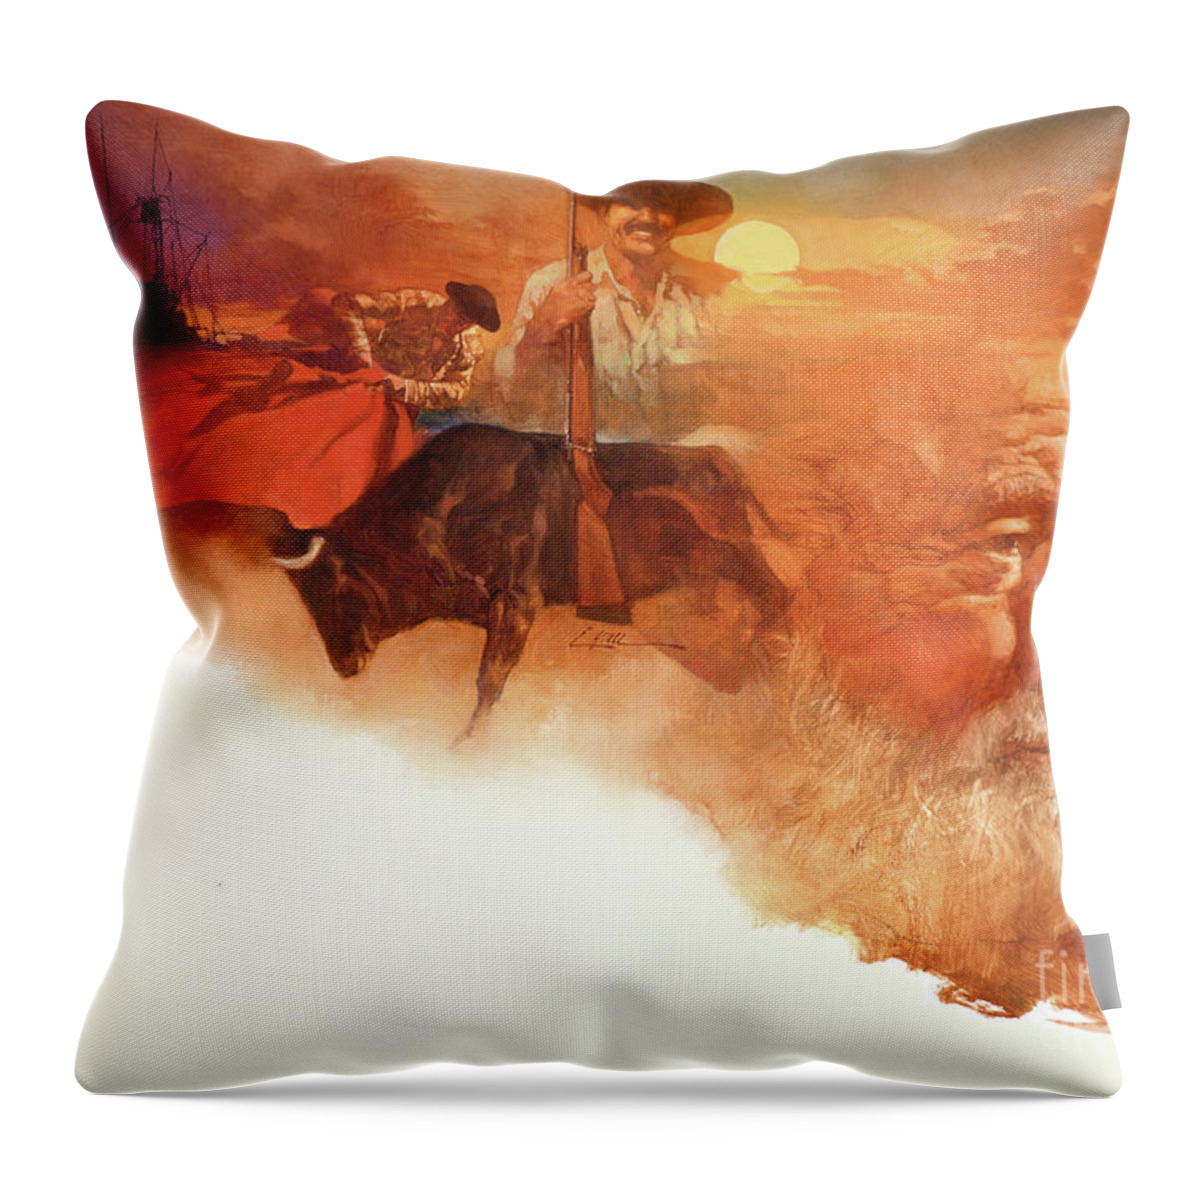 Dennis Lyall Throw Pillow featuring the painting Ernest Hemingway by Dennis Lyall